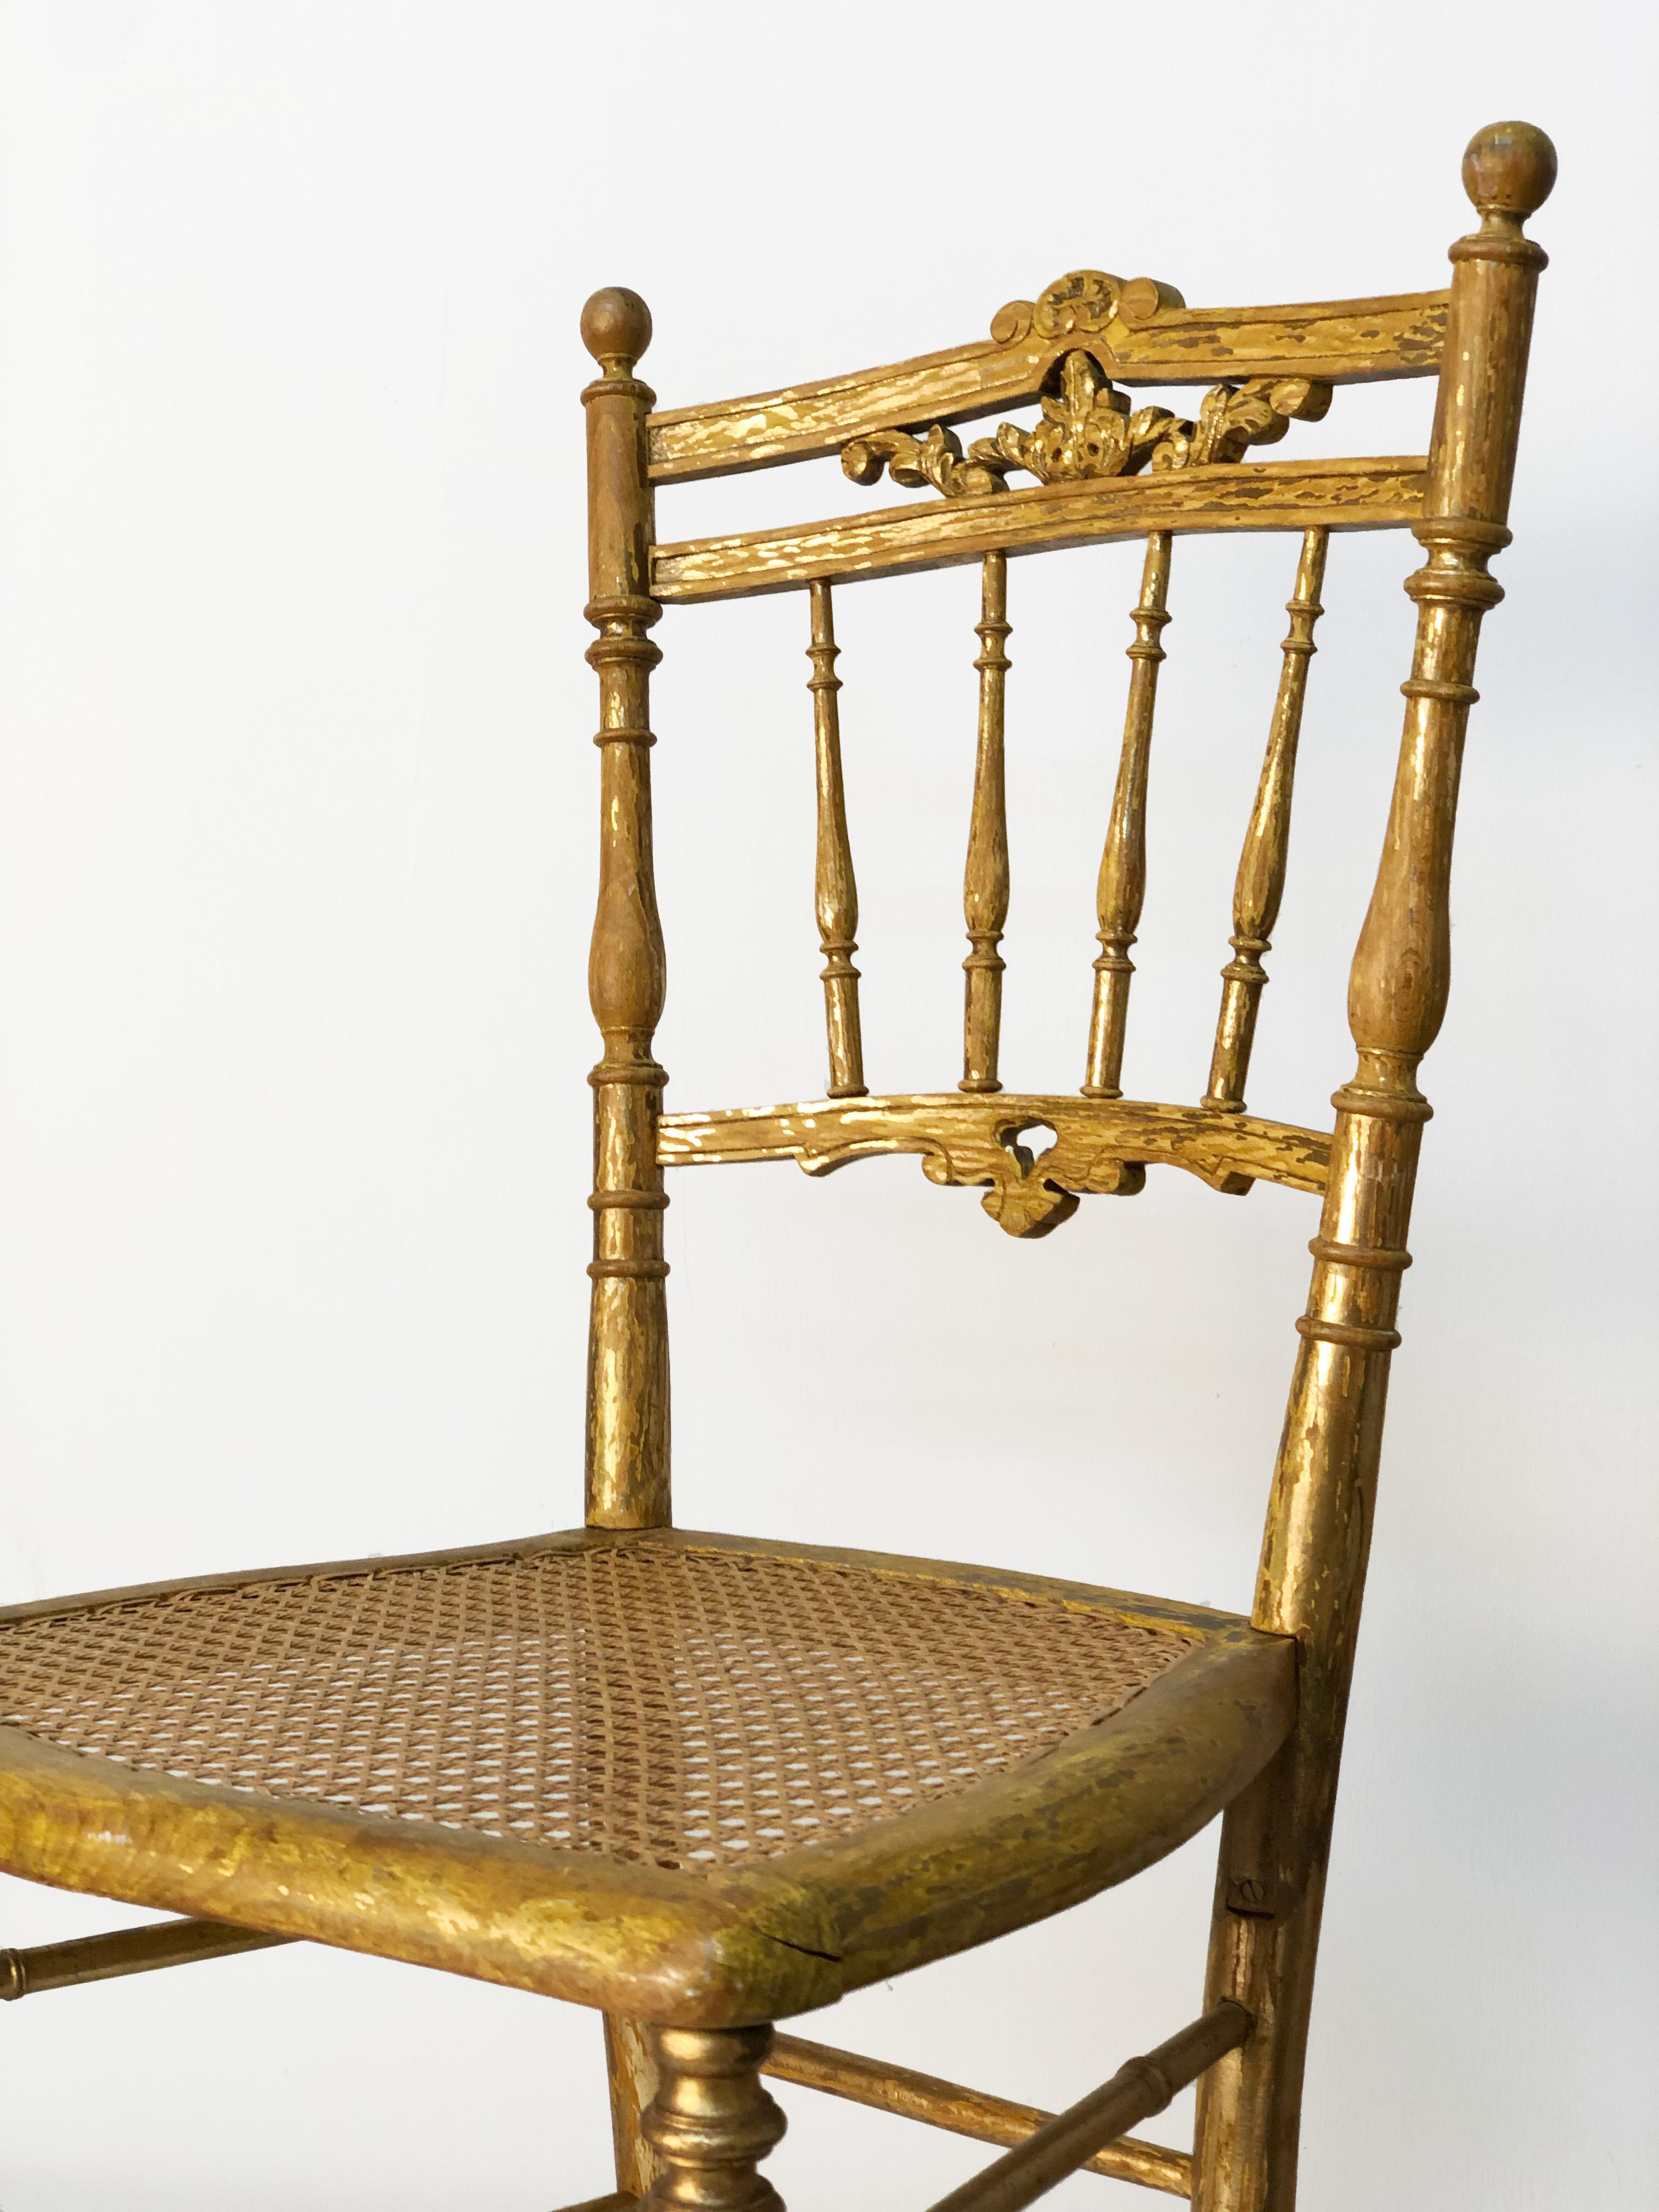 Offered for your consideration are a pair of antique Italian 17th century gilded Empire Chiavari chairs. Gilded willow hardwood with woven cane seat. Hand-carved ornamentation to top rail. Lathed legs, spindles and stretchers. Heavy losses to